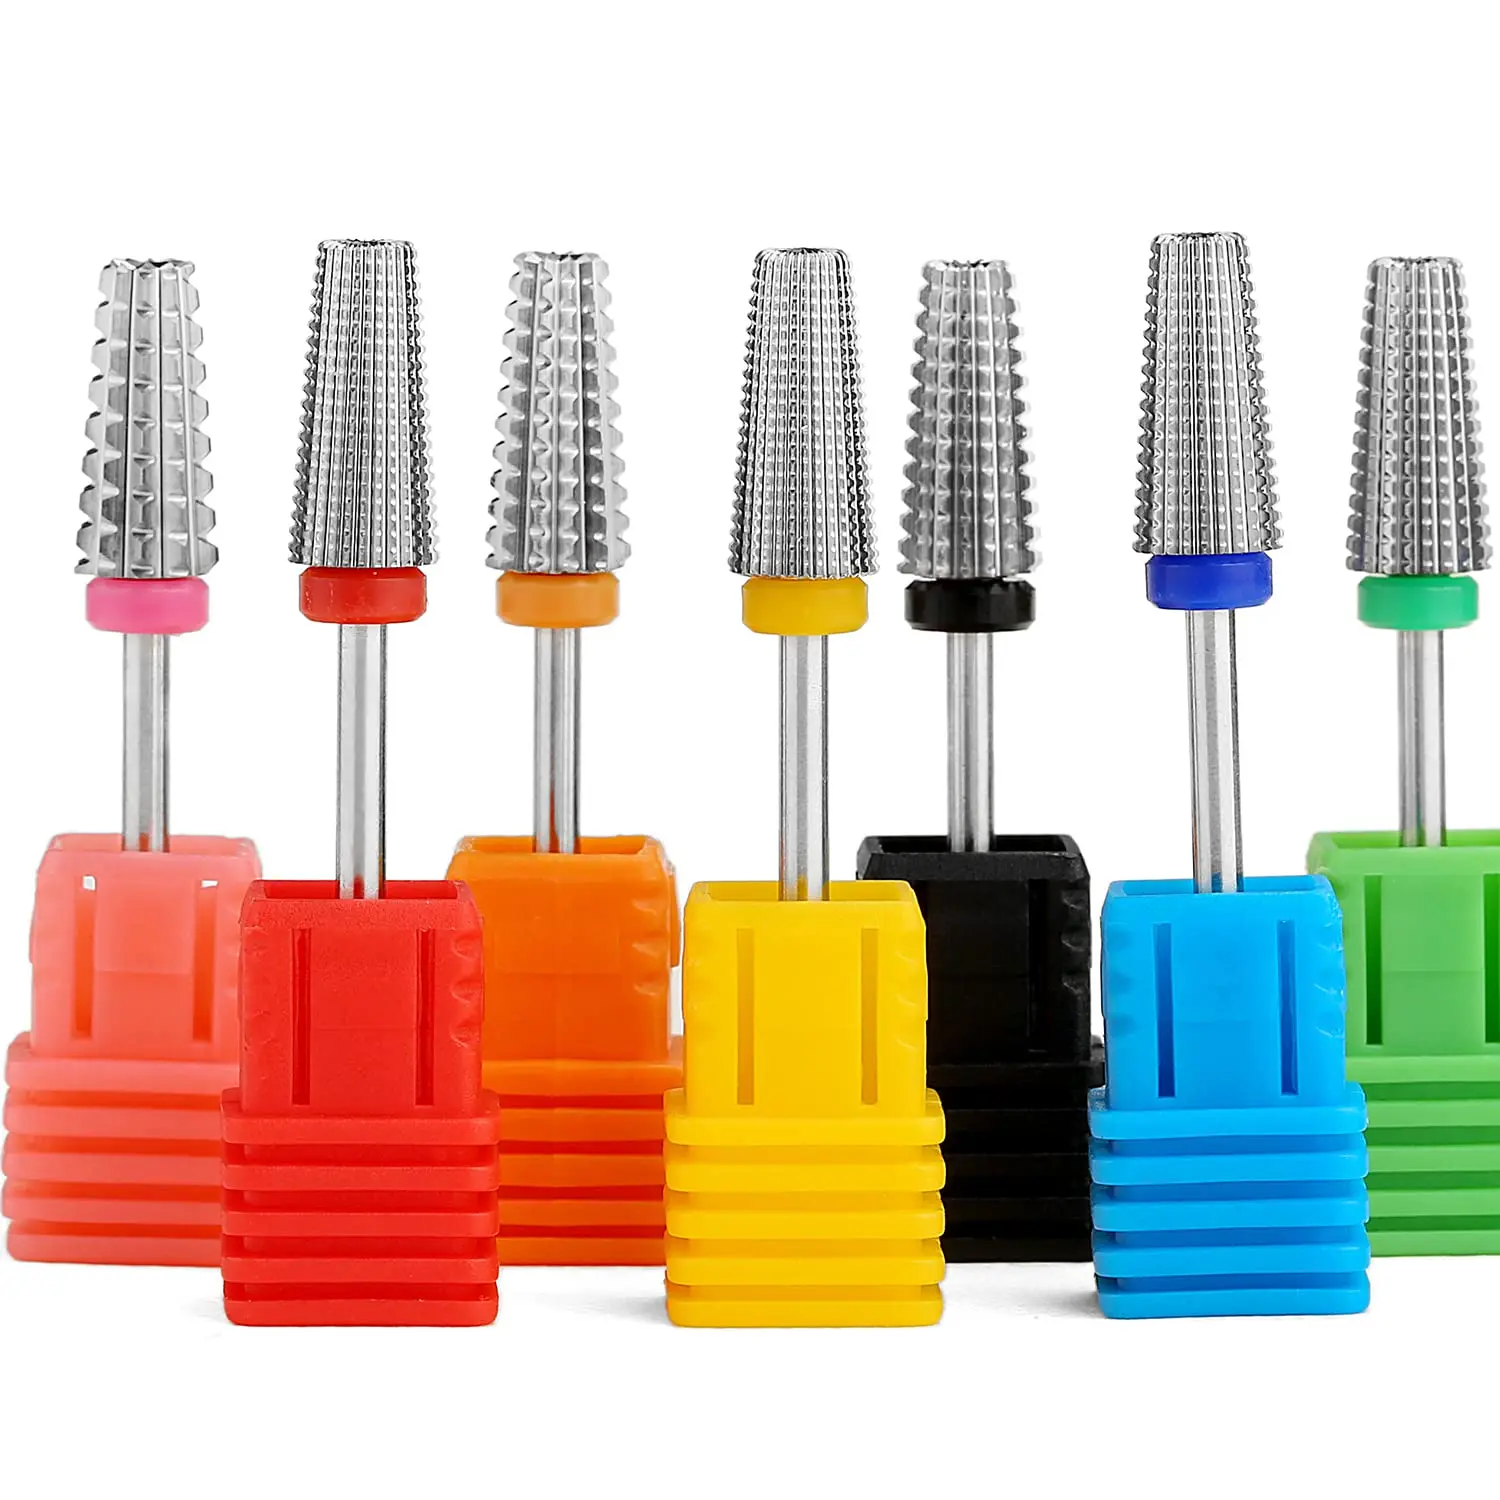 7 Types Tungsten Cabide Nail Bit 5 In 1 Milling Cutter Two Way Rotate Cuticle Drill Bit for Acrylic Hard Gel Remove 3/32